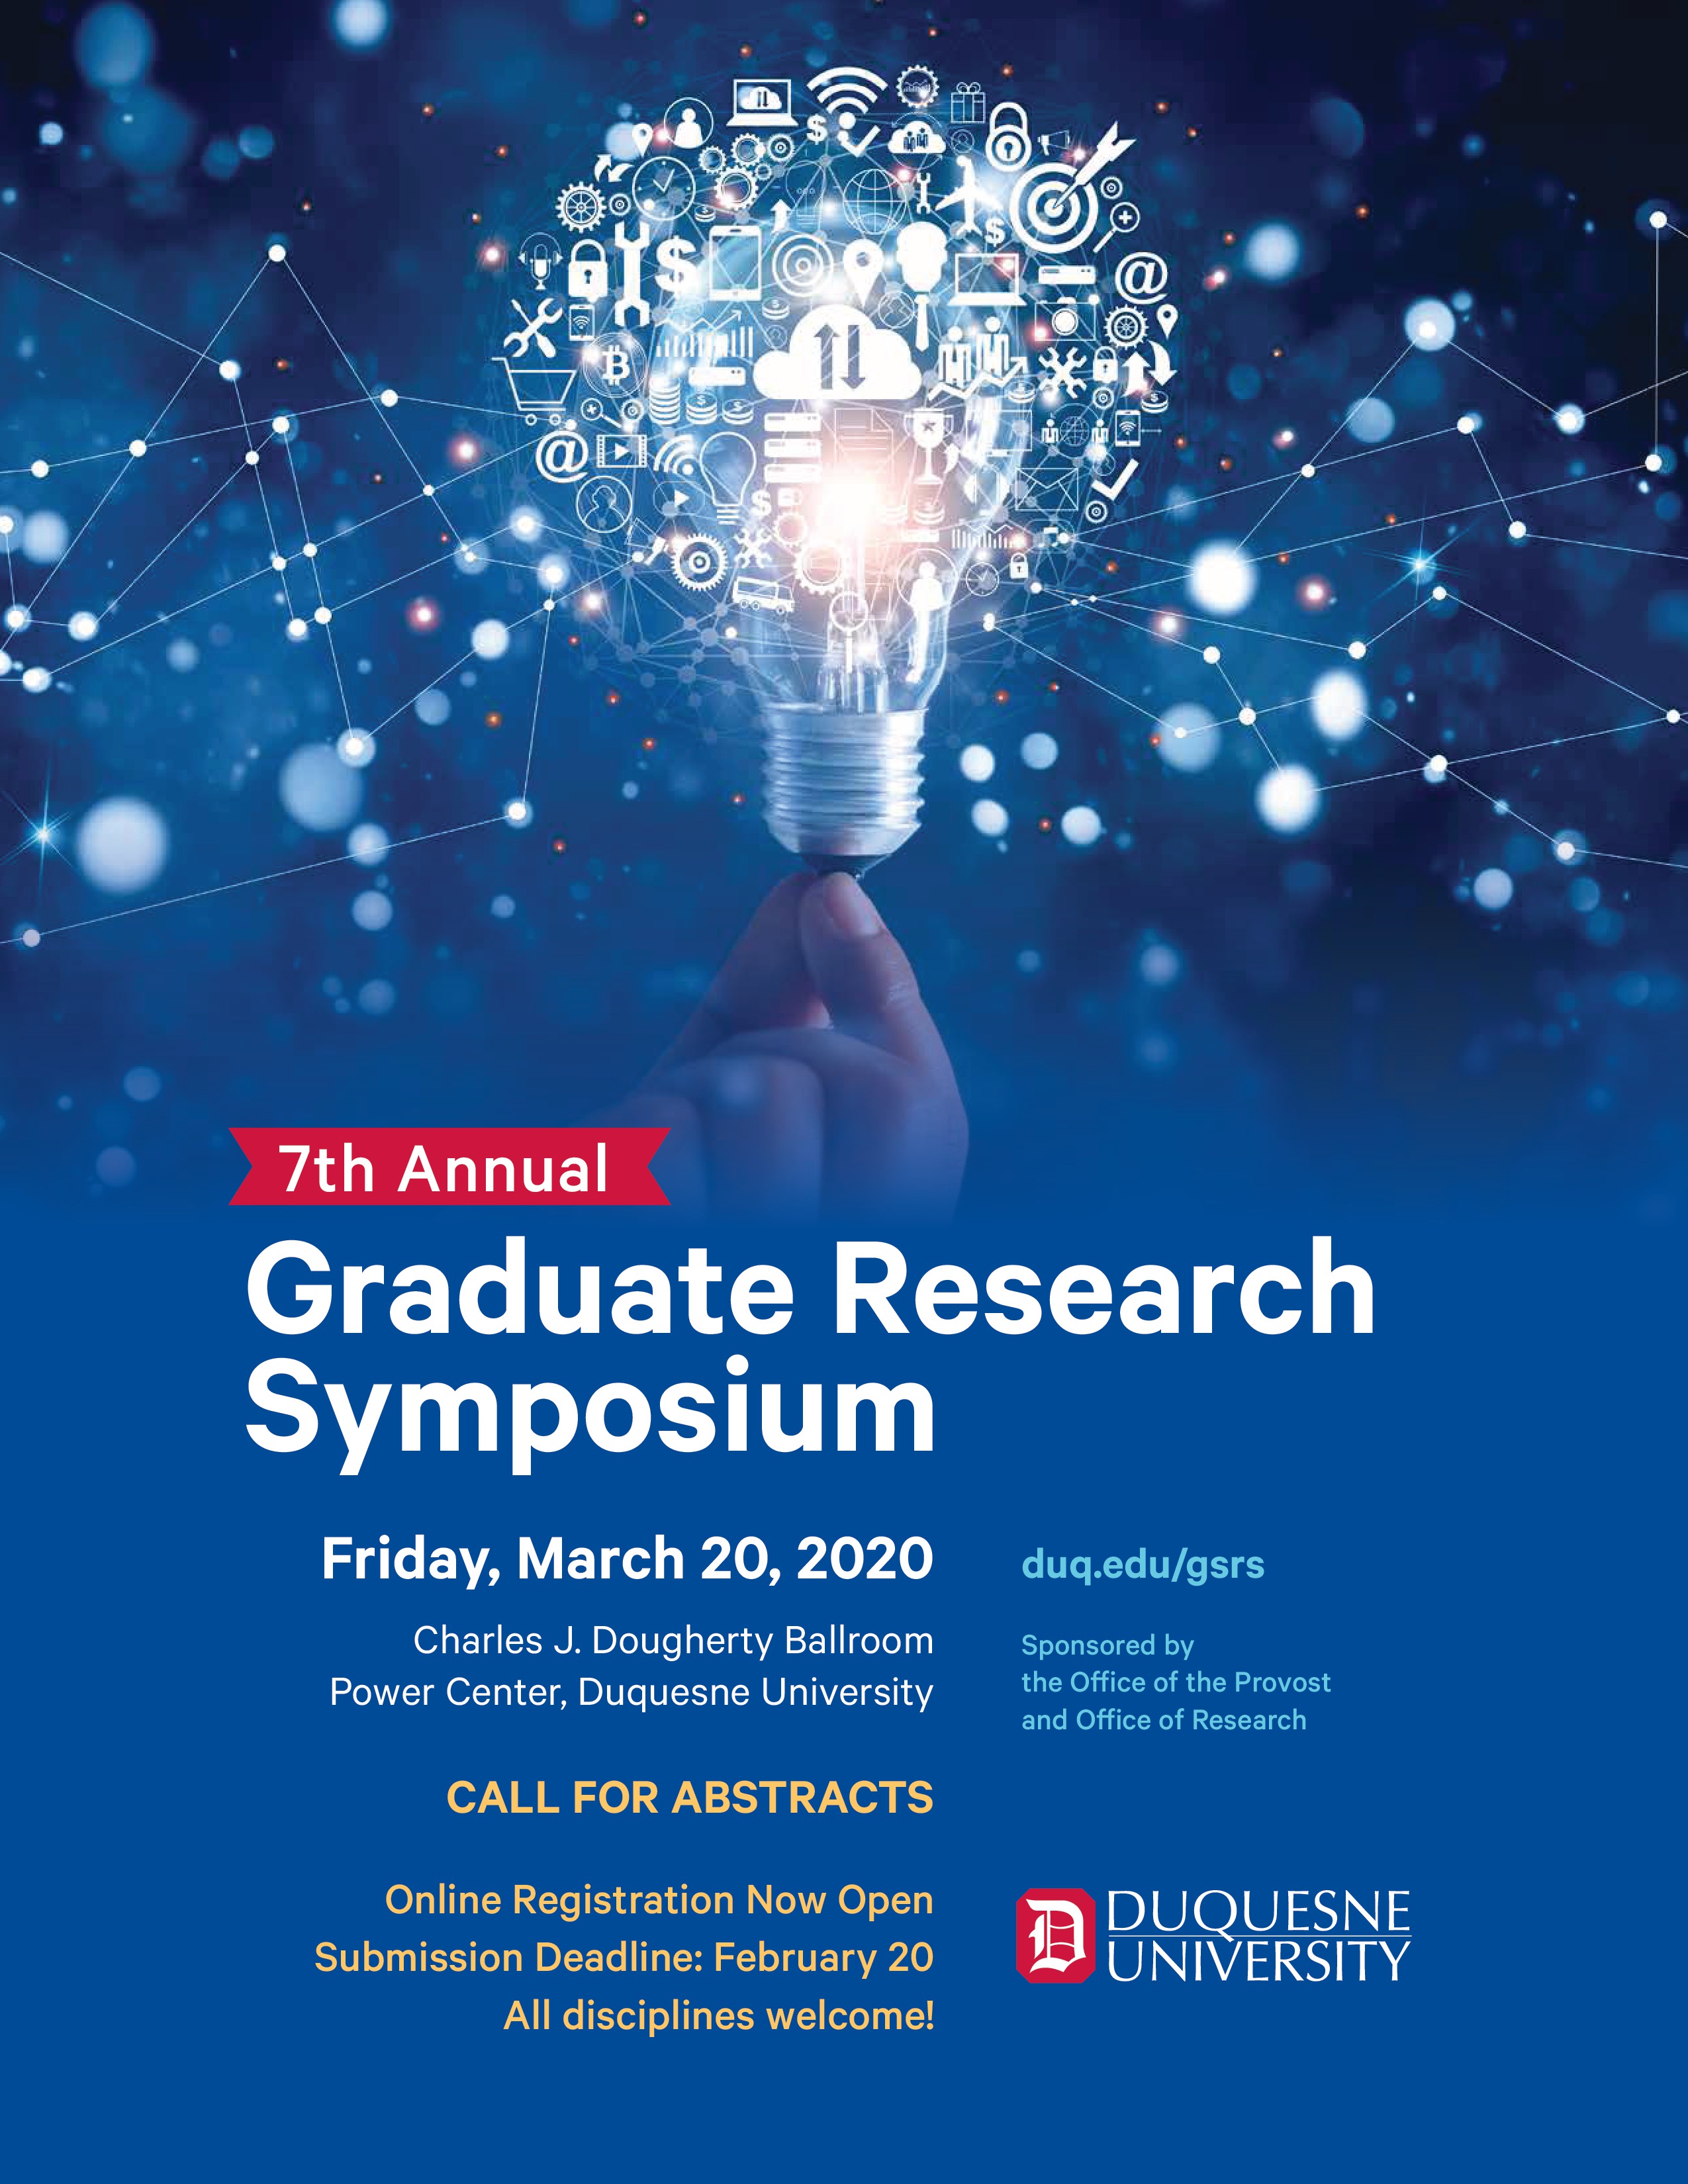 The 7th Annual Graduate Student Research Symposium